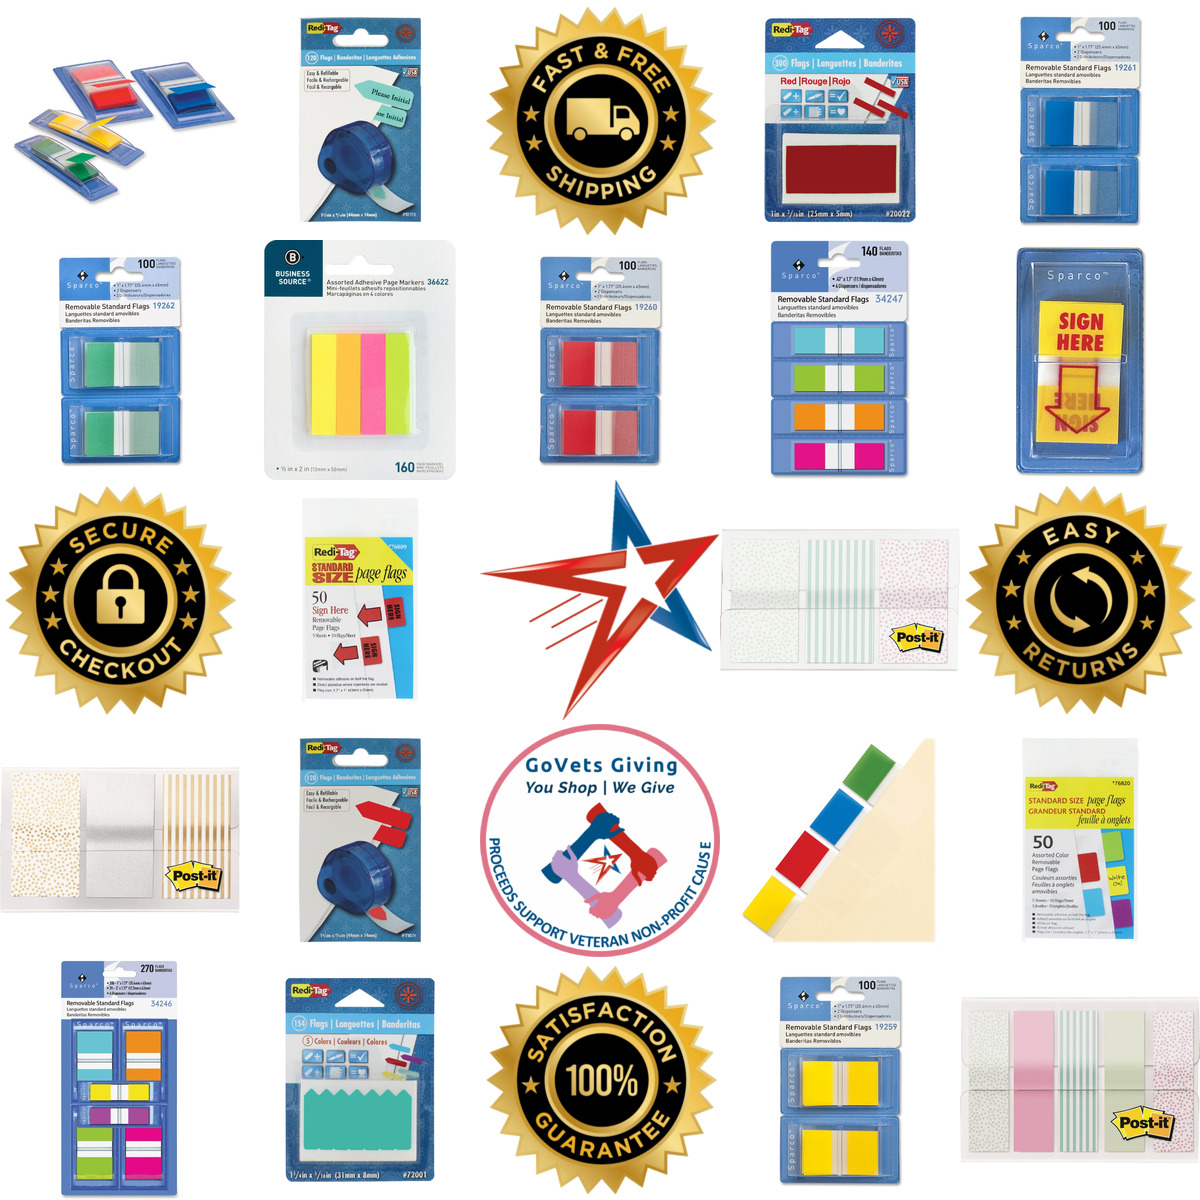 A selection of Sticky Flags products on GoVets